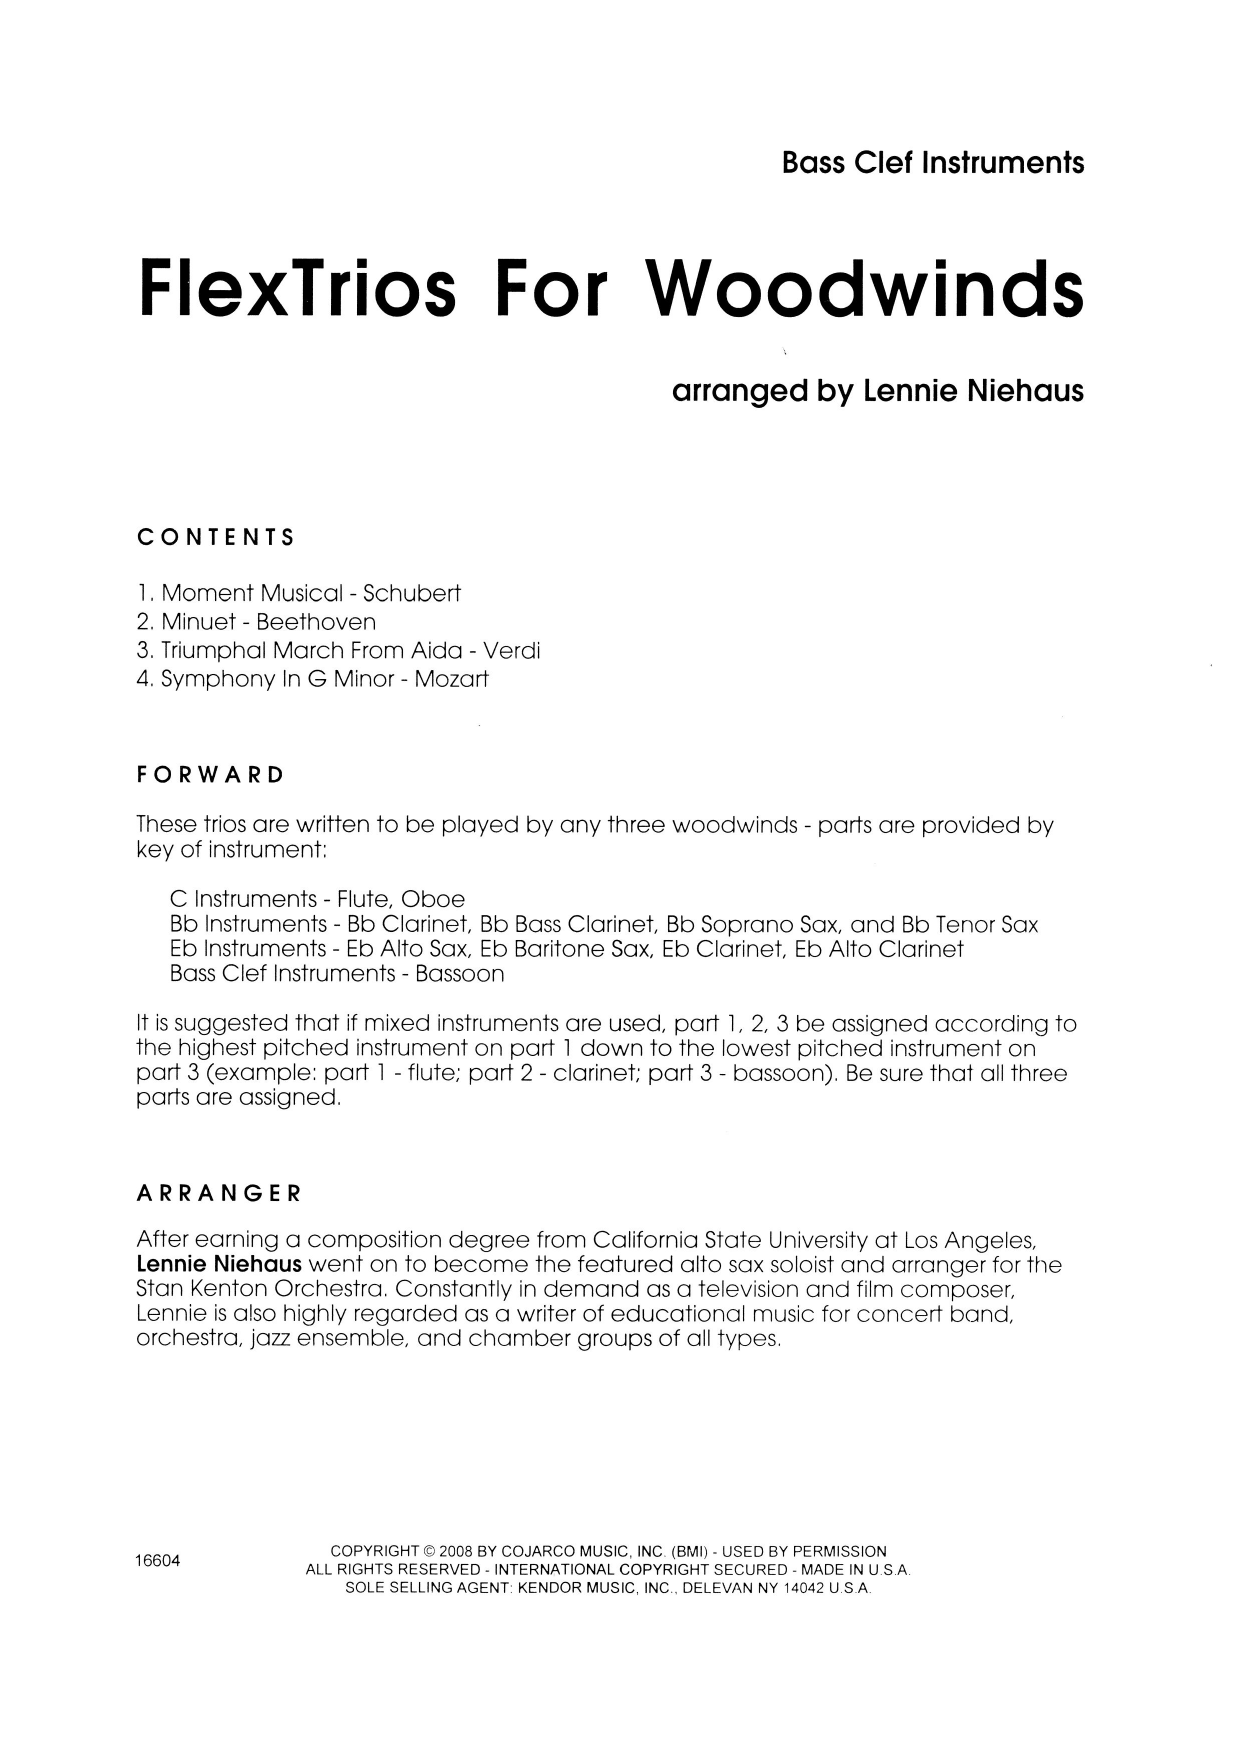 Download Lennie Niehaus FlexTrios For Woodwinds (playable by an Sheet Music